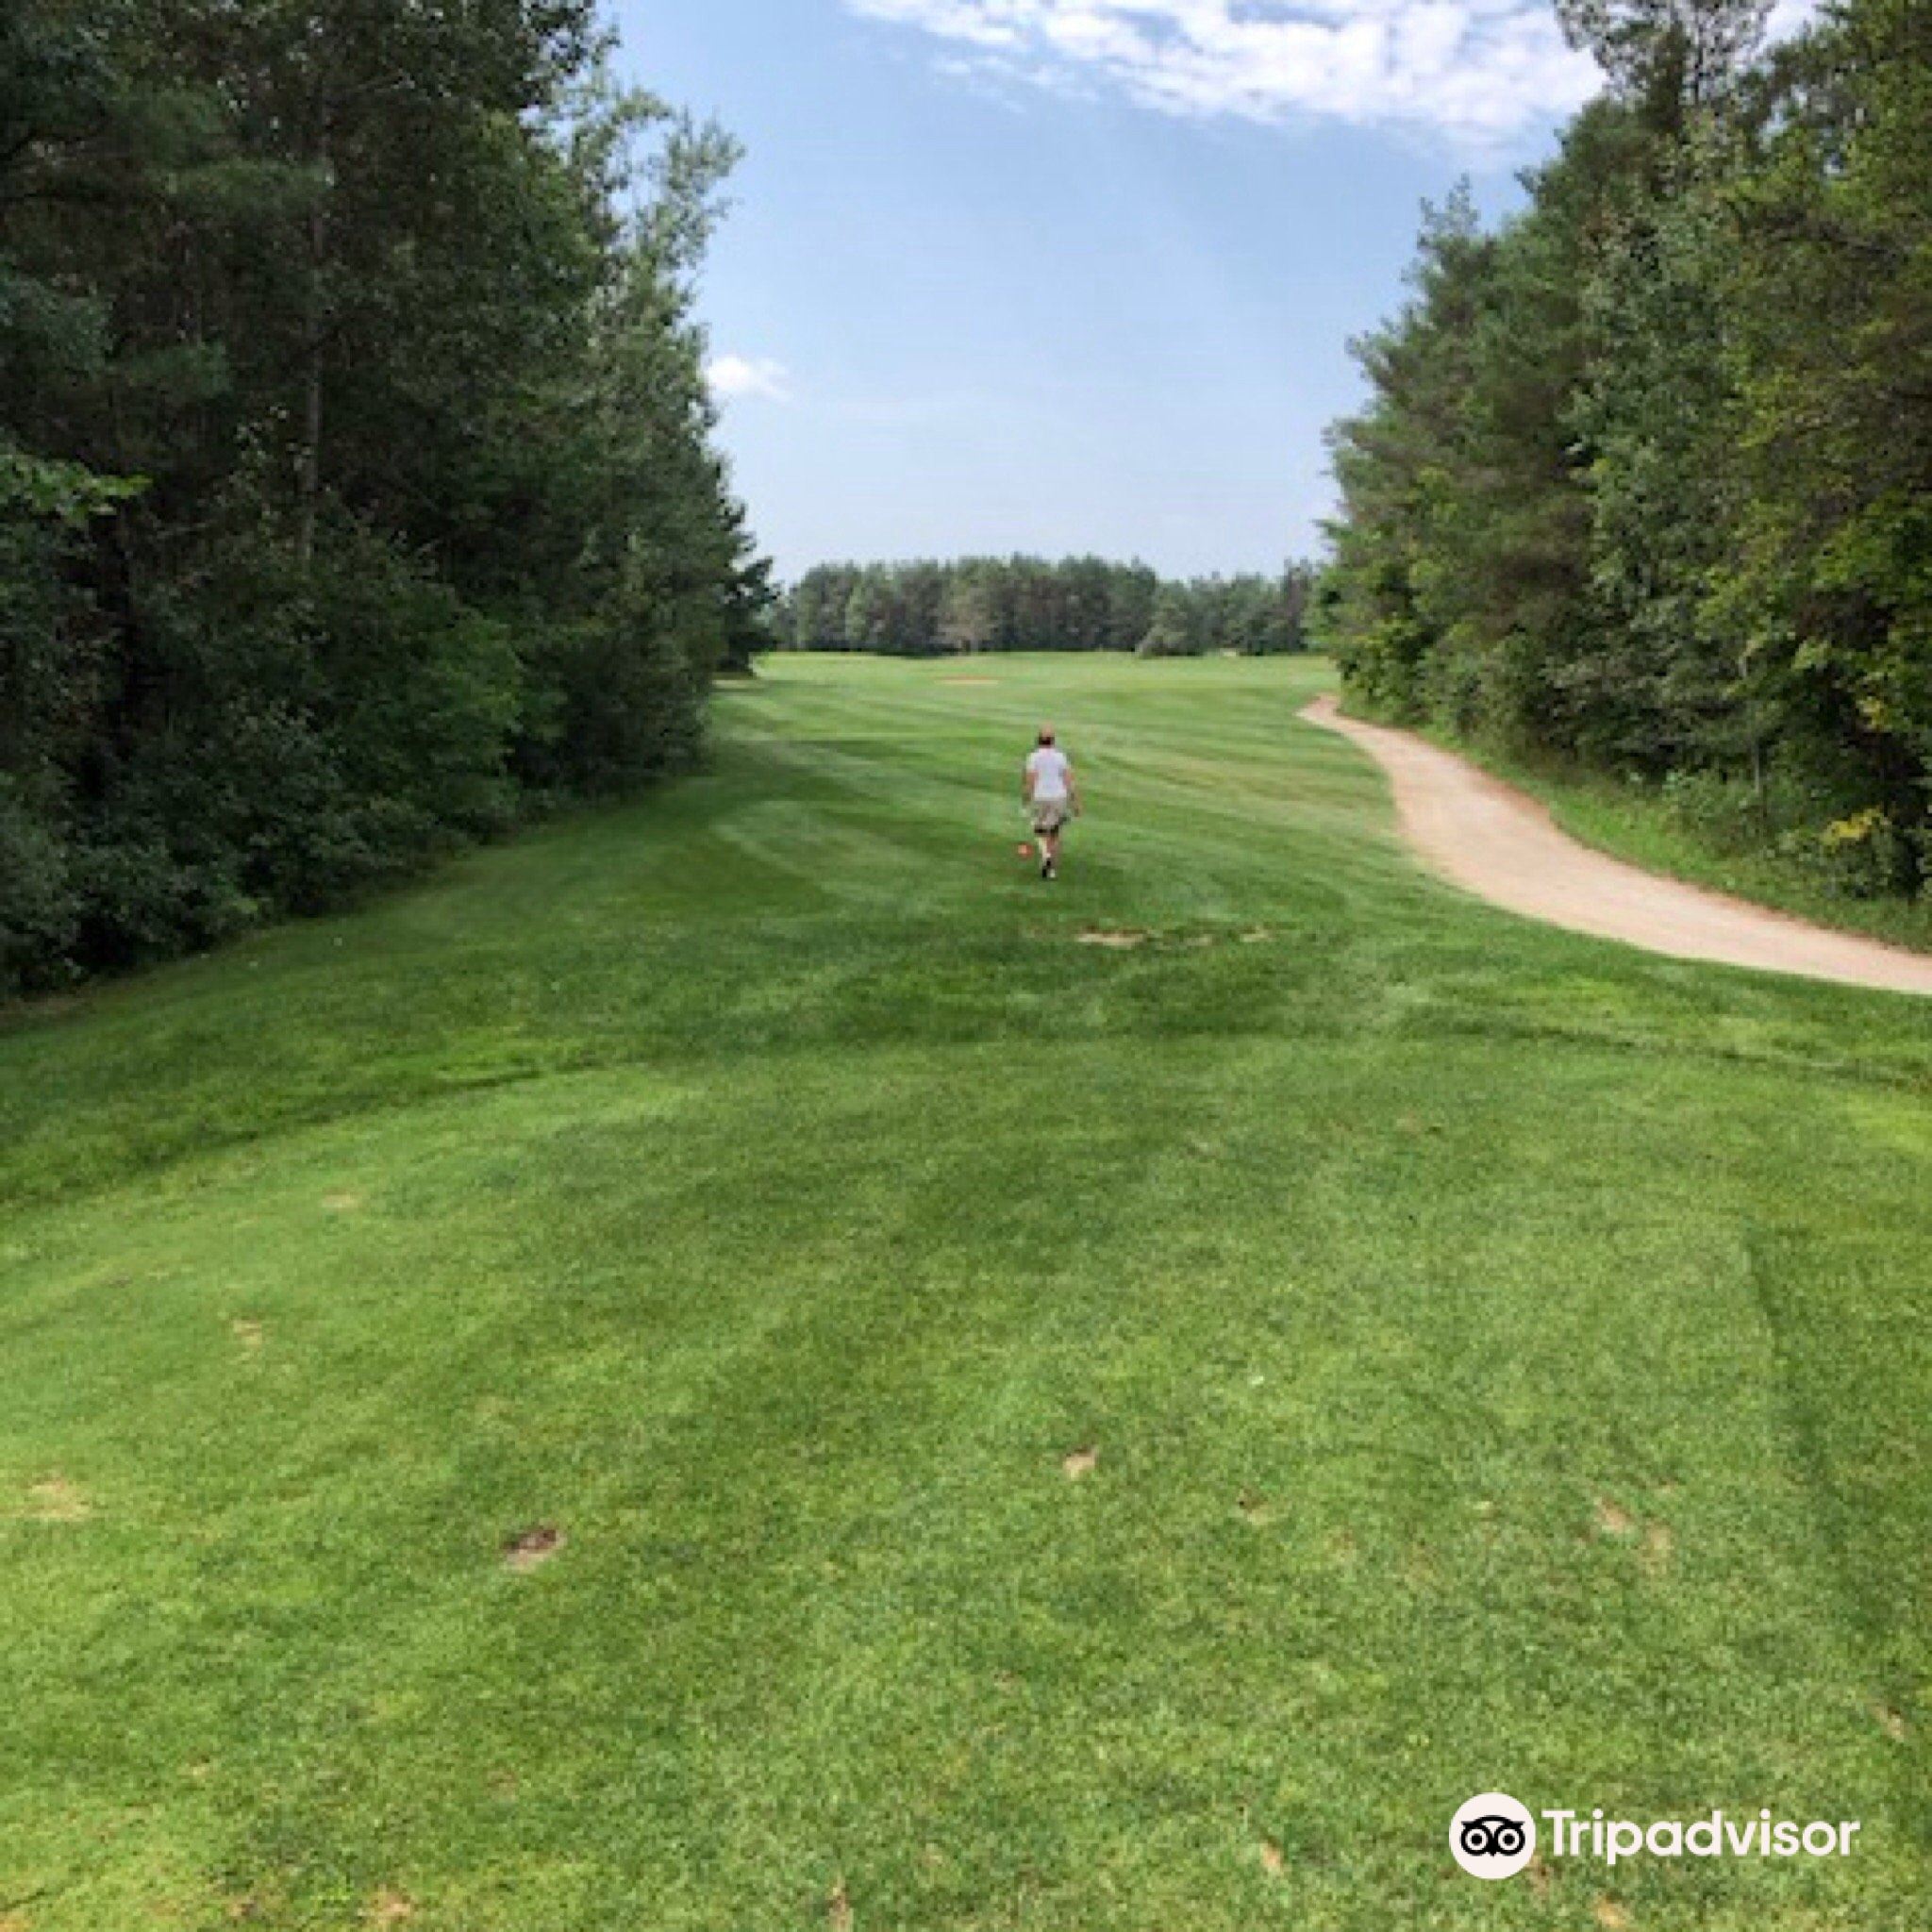 Pinewoods Golf at Sauble Beach - The different types of basic golf